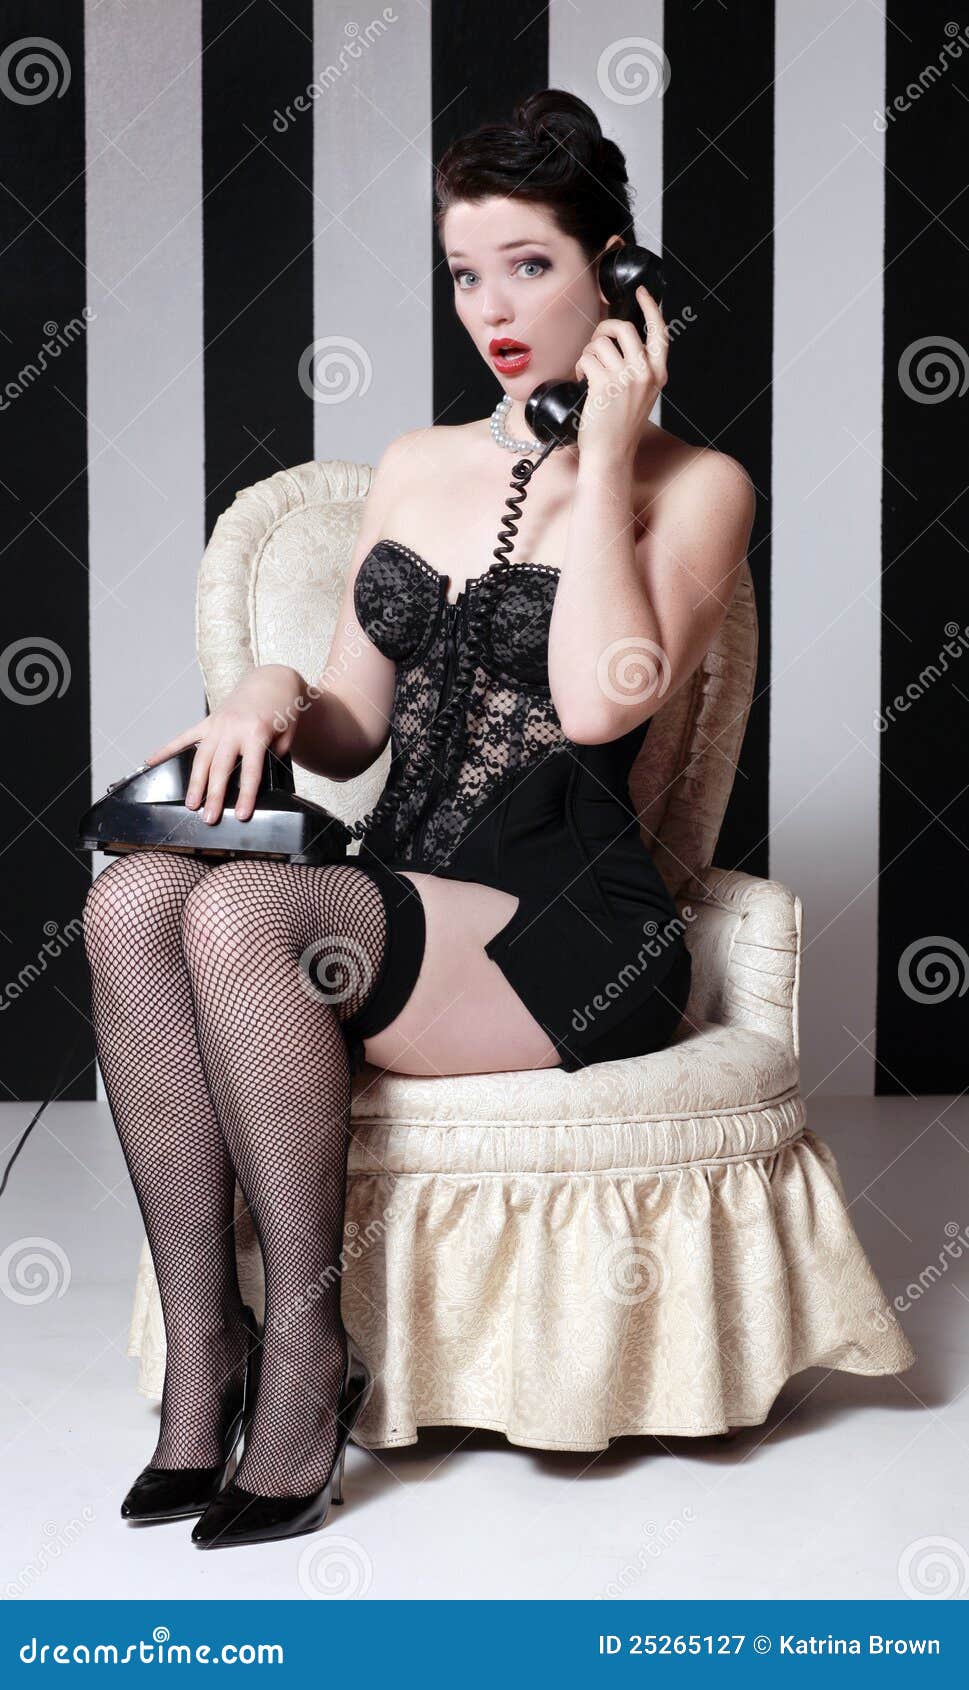 Pinup Style Vintage Image Stock Image Image Of Lingerie